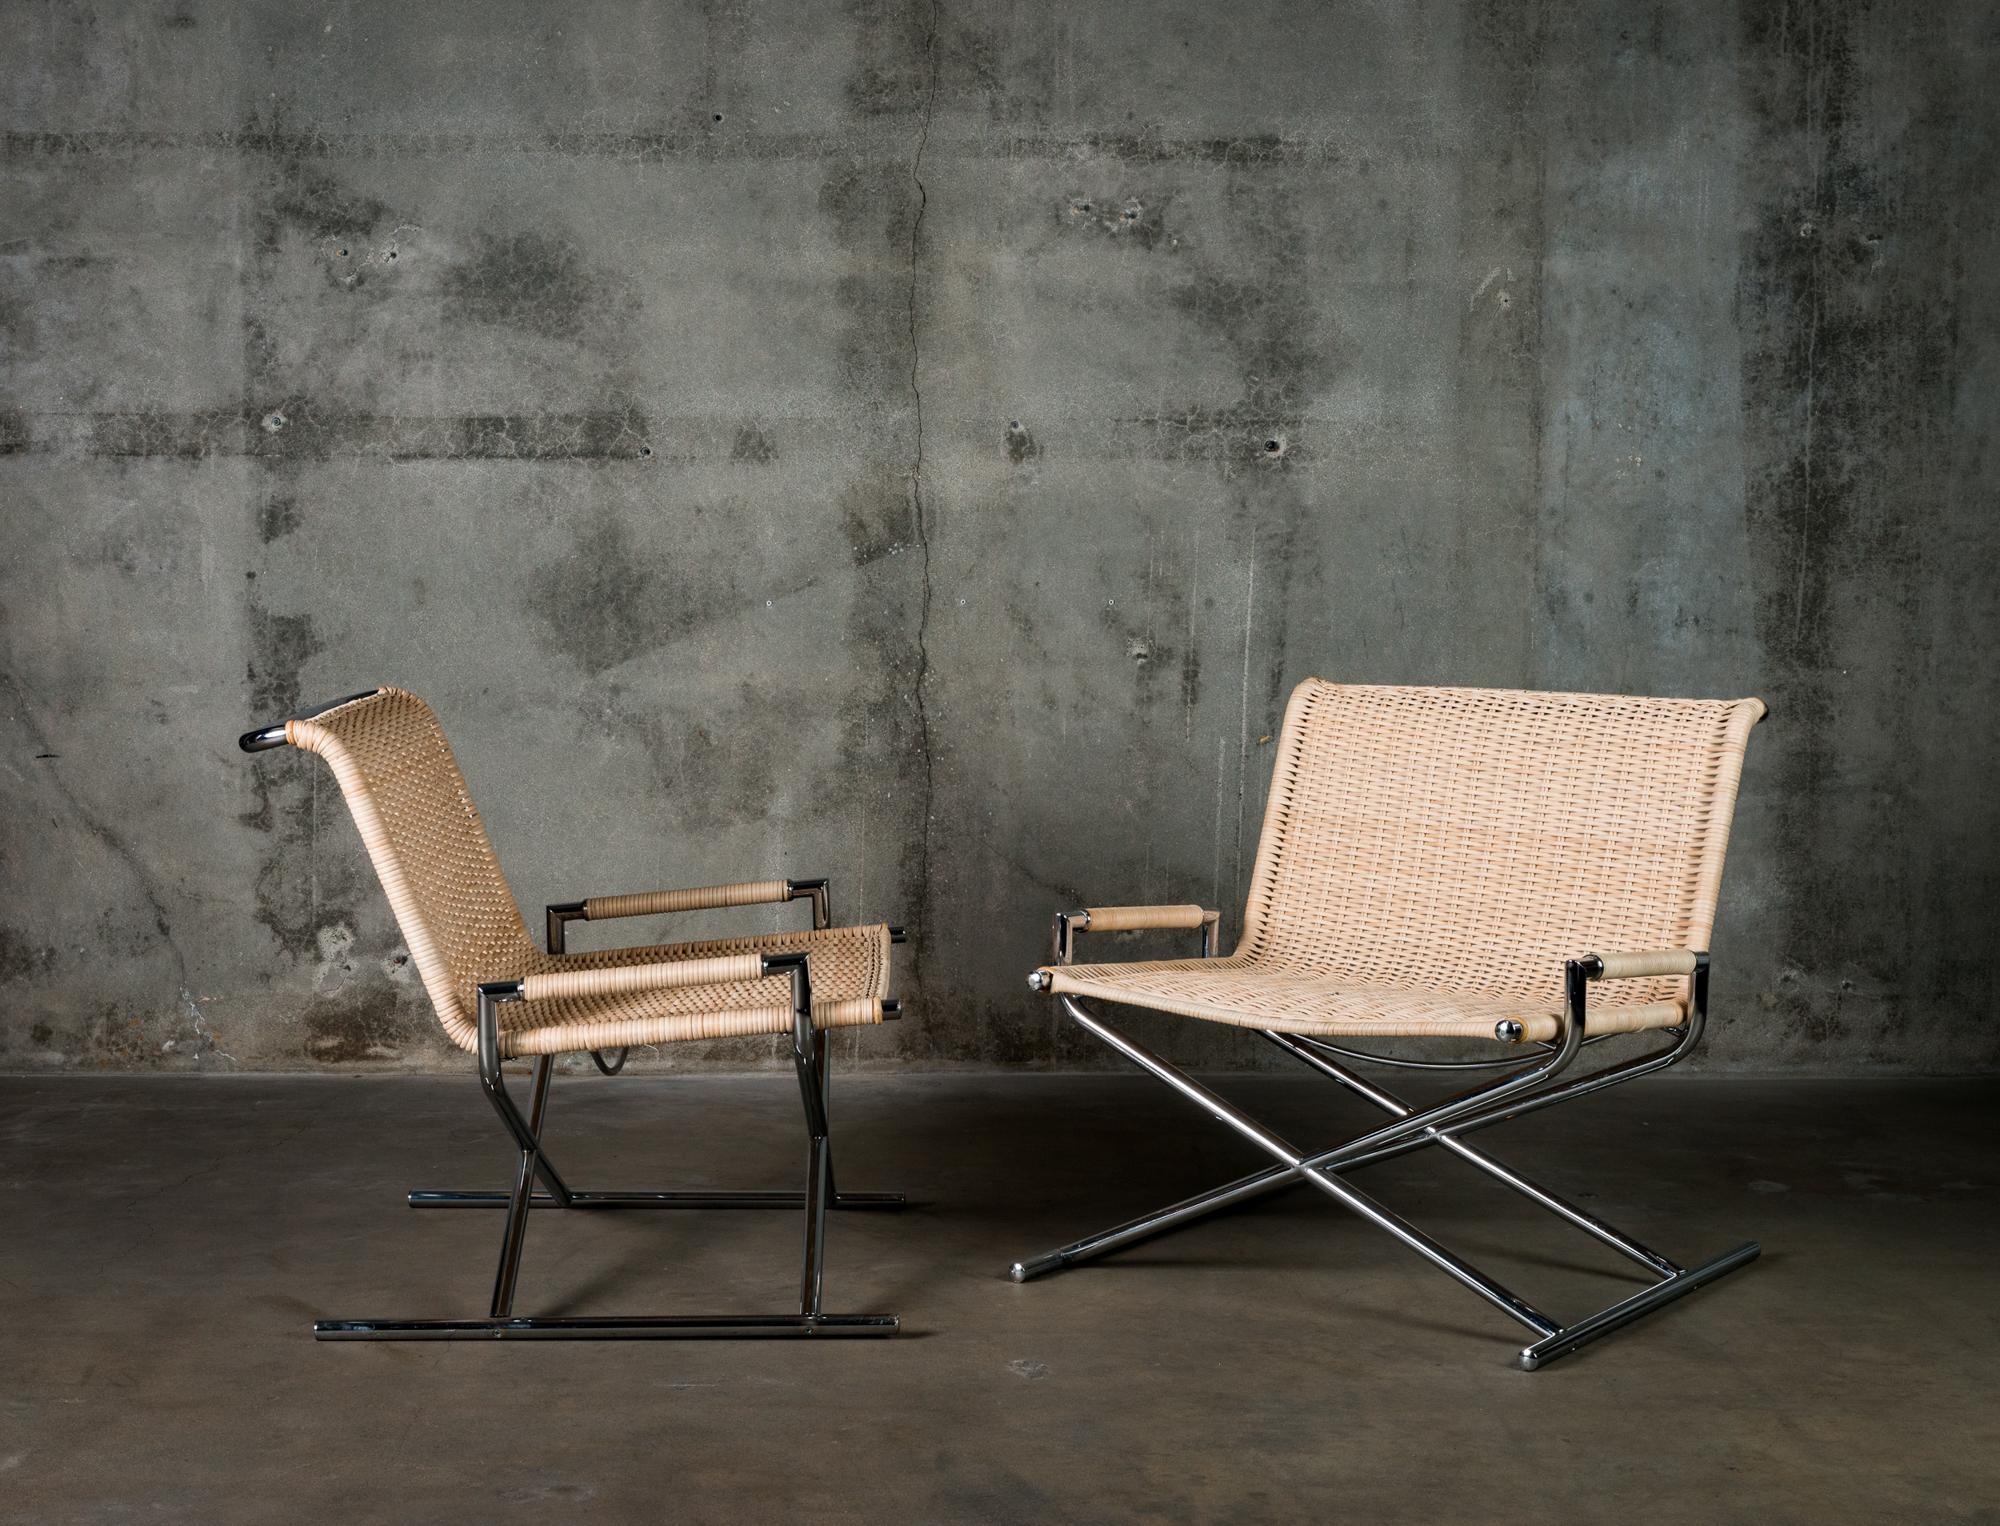 Pair of Ward Bennett for Brickell Associates “Sled” lounge chairs, in cane and chrome steel, 1960s.